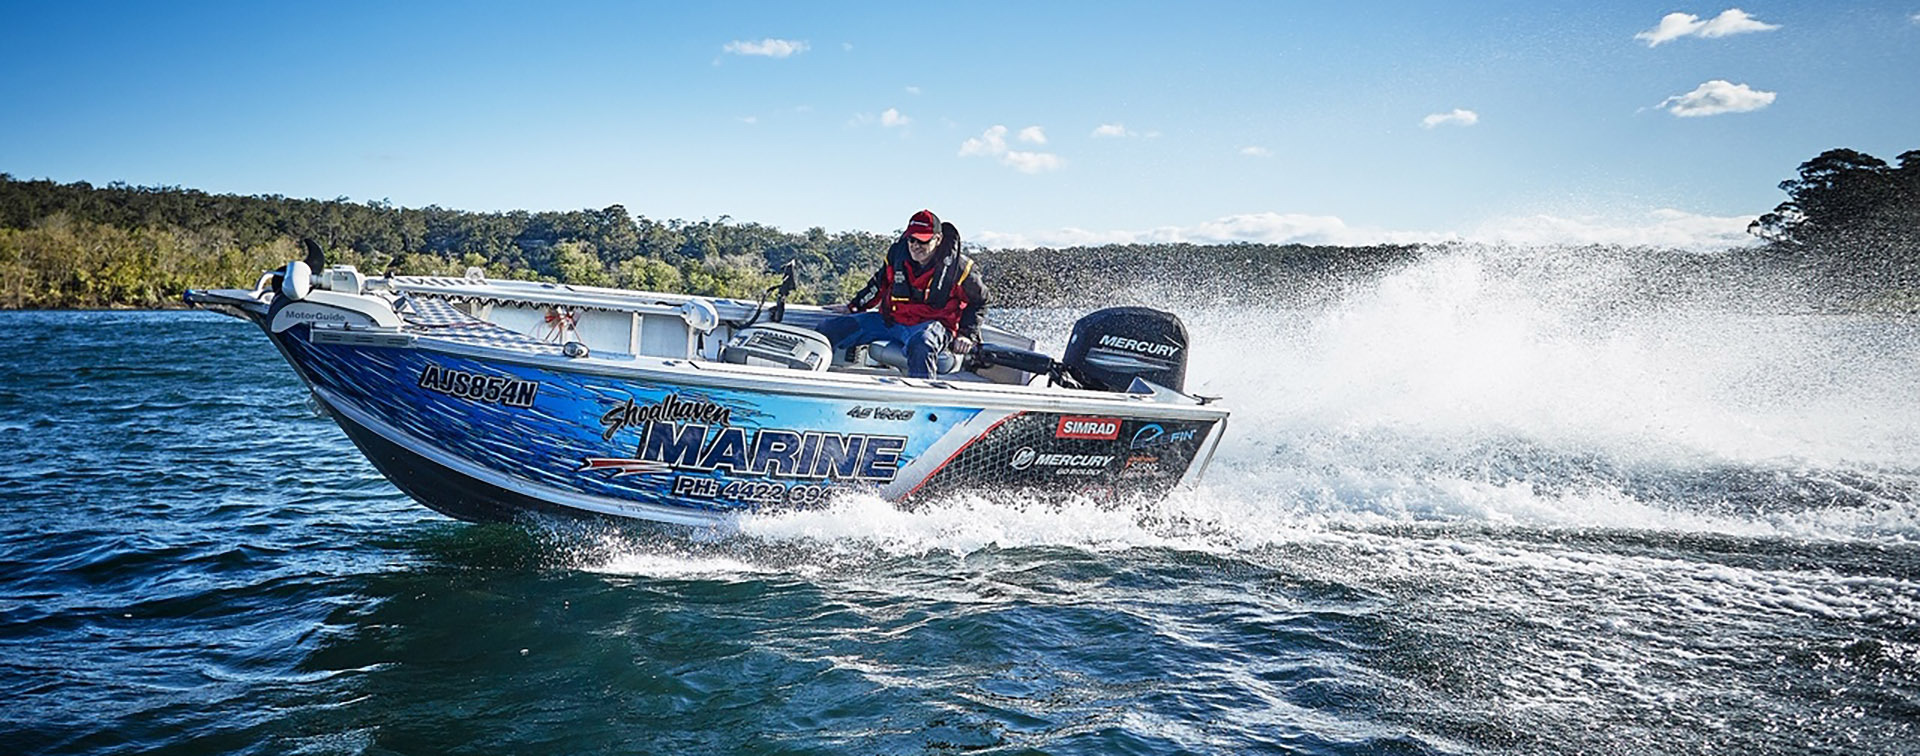 Shoalhaven Marine Sales and Service